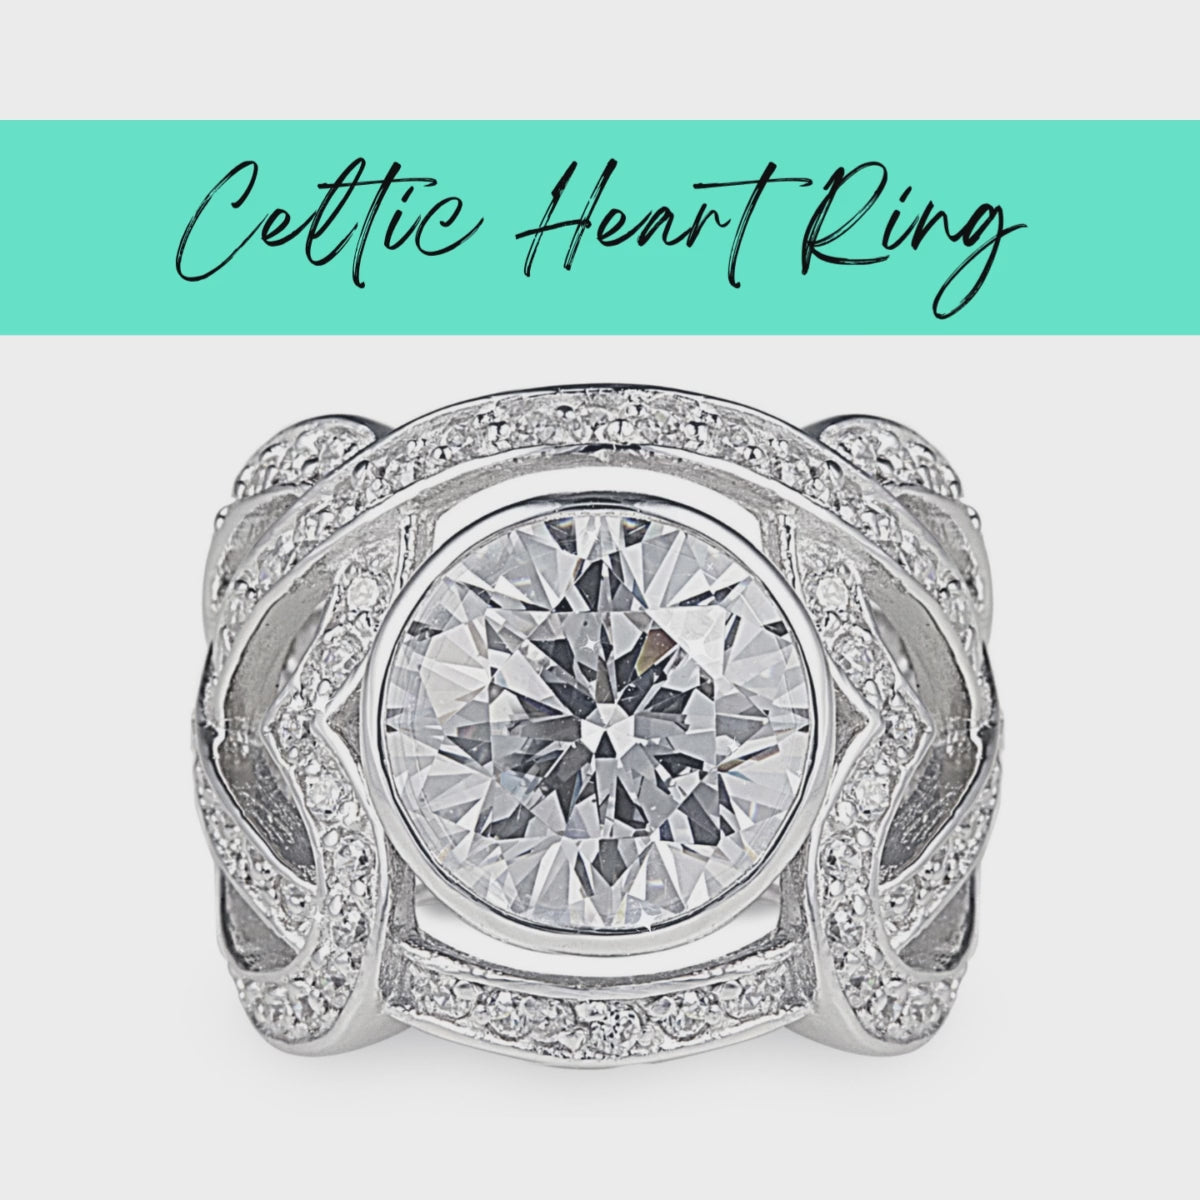 Celtic Heart Ring in 925 sterling silver with cubic zirconia stones. Shop luxury jewellery by Bellagio & Co. Worldwide shipping.